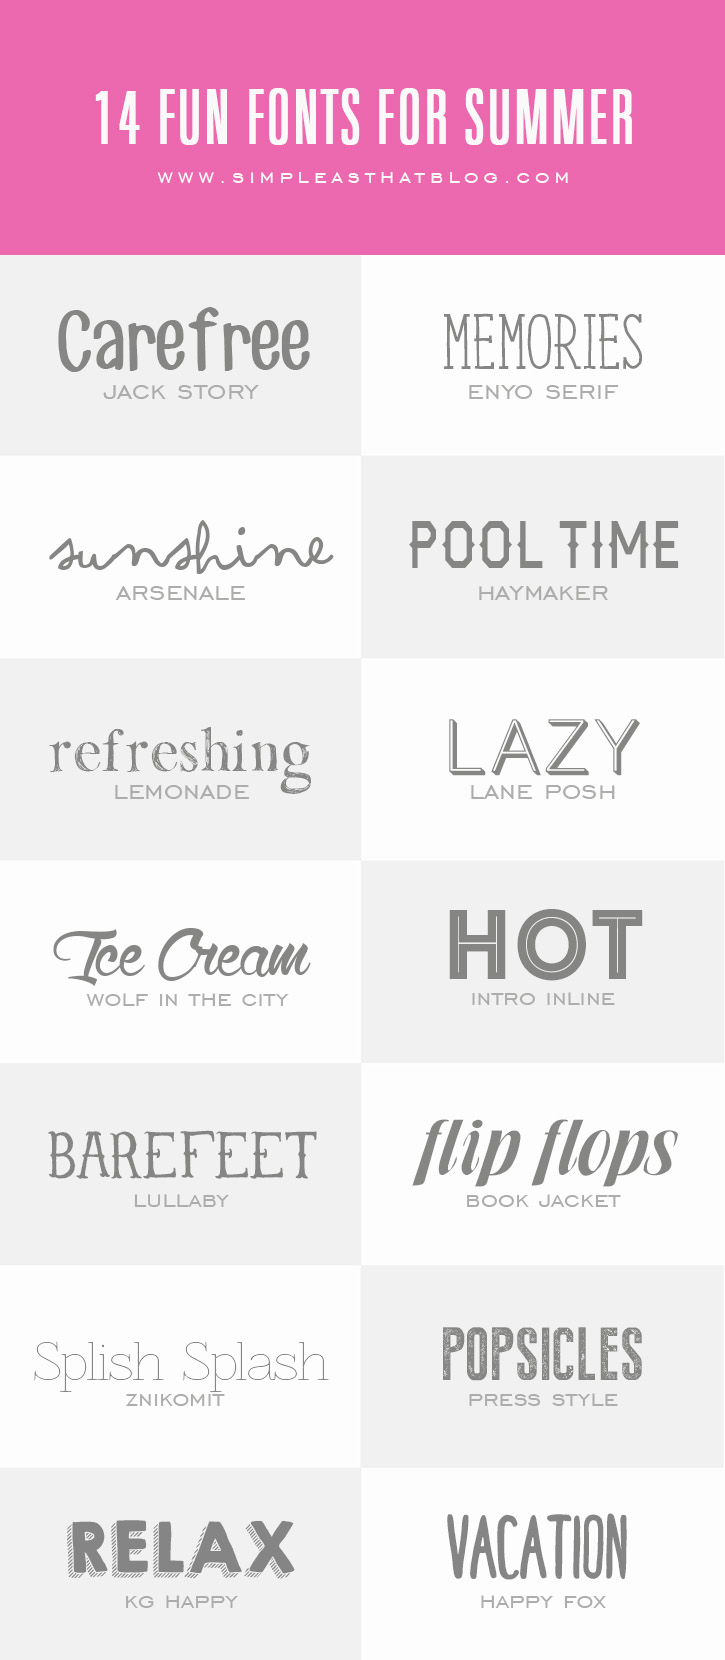 14 Fun Fonts For Summer